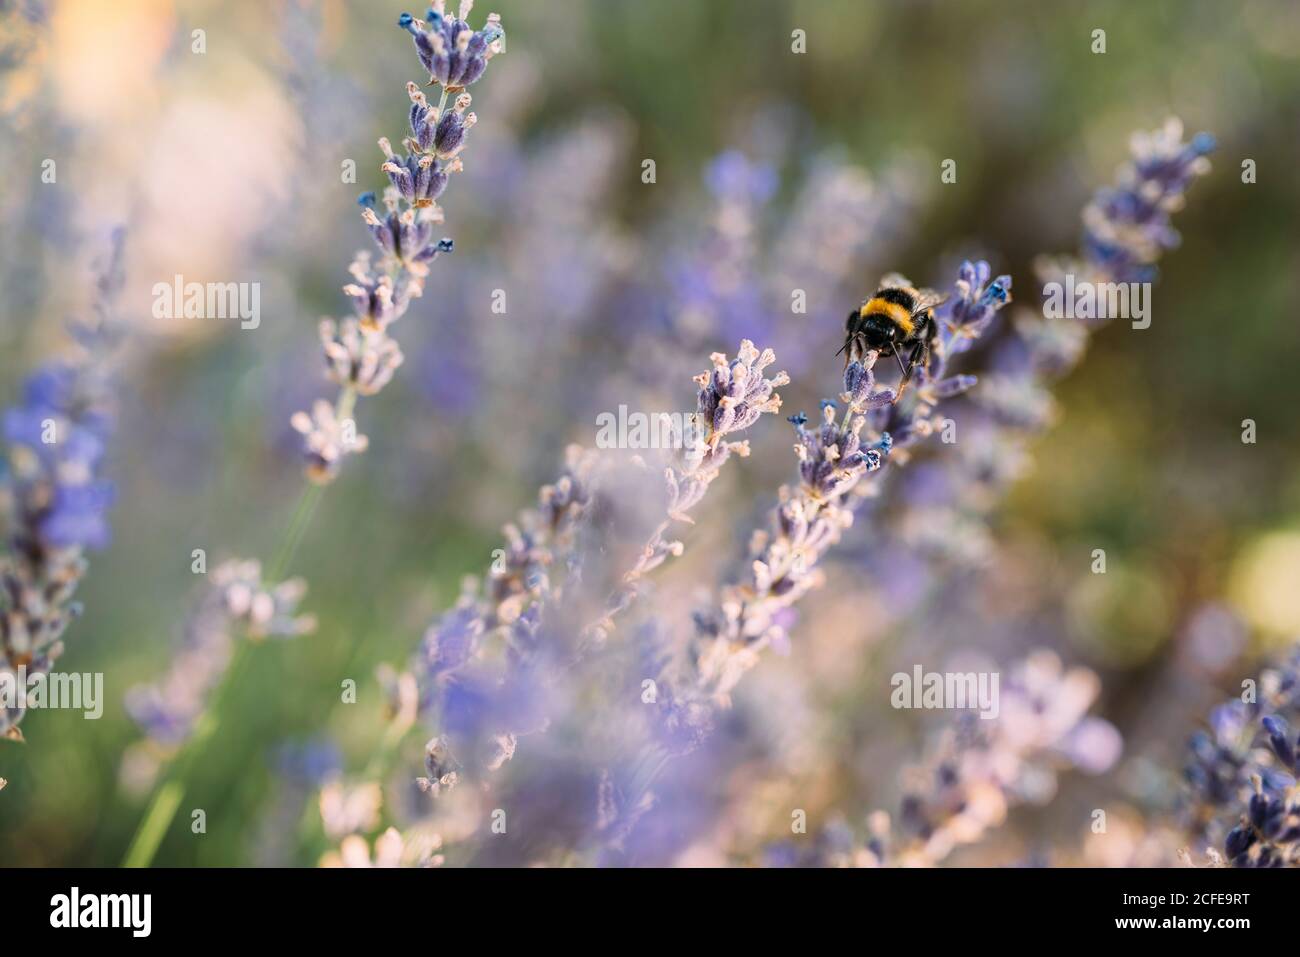 Bumblebee collects nectar from a lavender flower Stock Photo